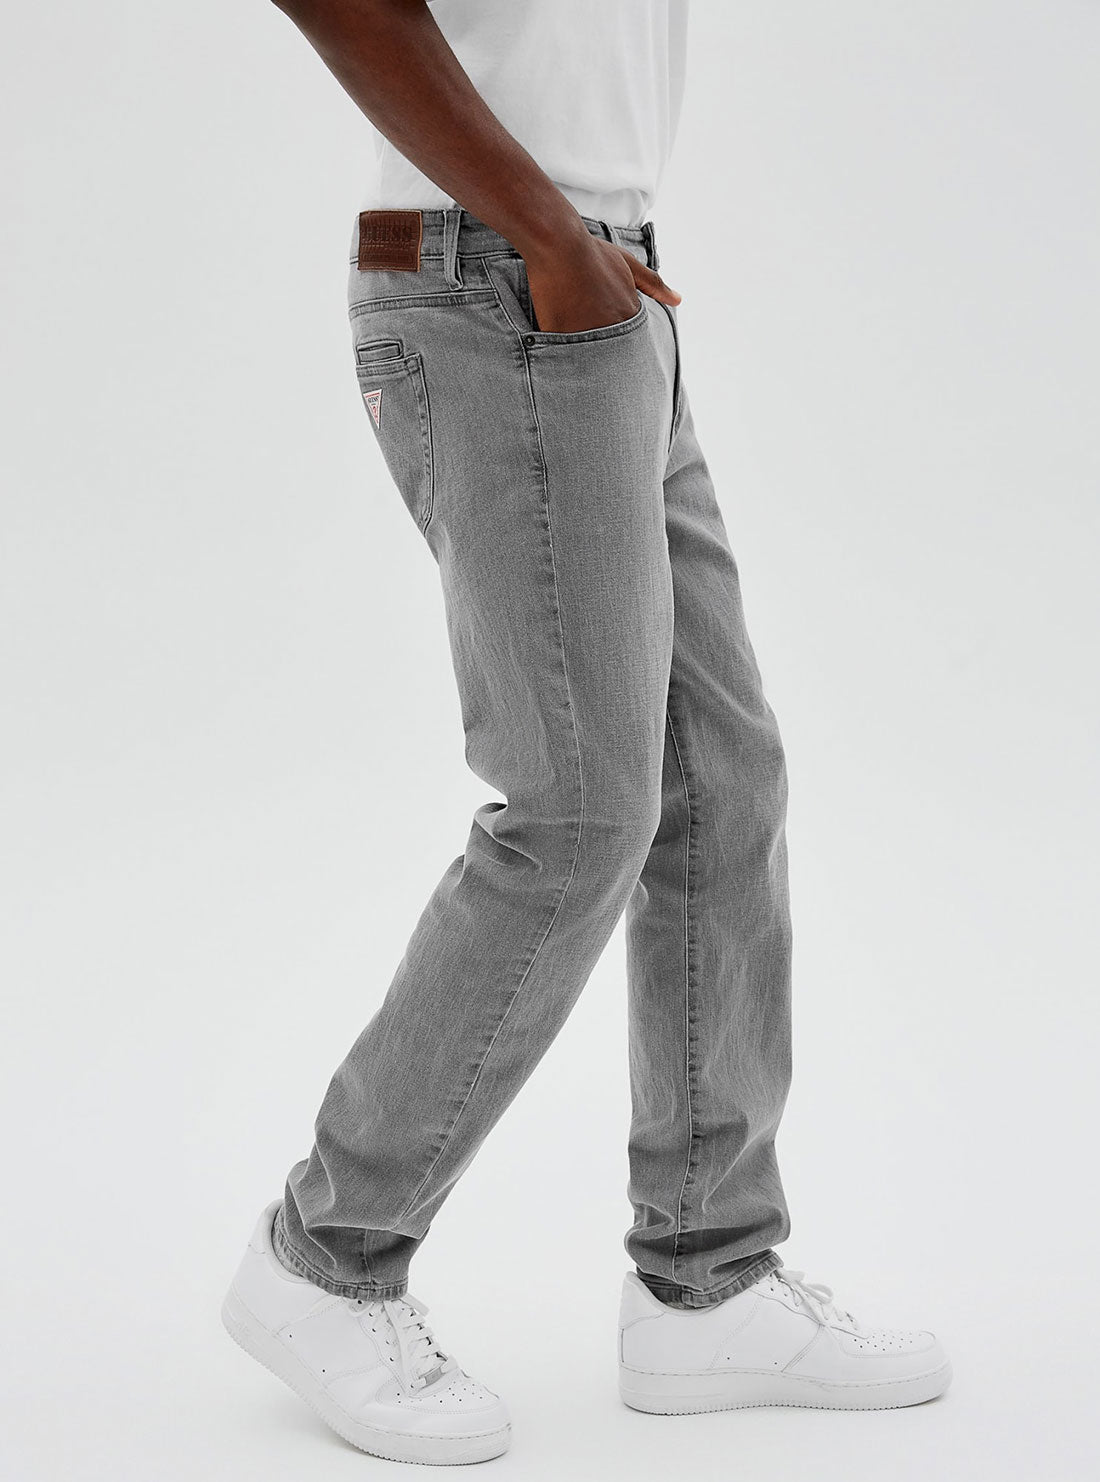 GUESS Mens Guess Originals Slim Straight Leg Jeans in Grey Pearl Wash M2GG33D4DA5 Side View